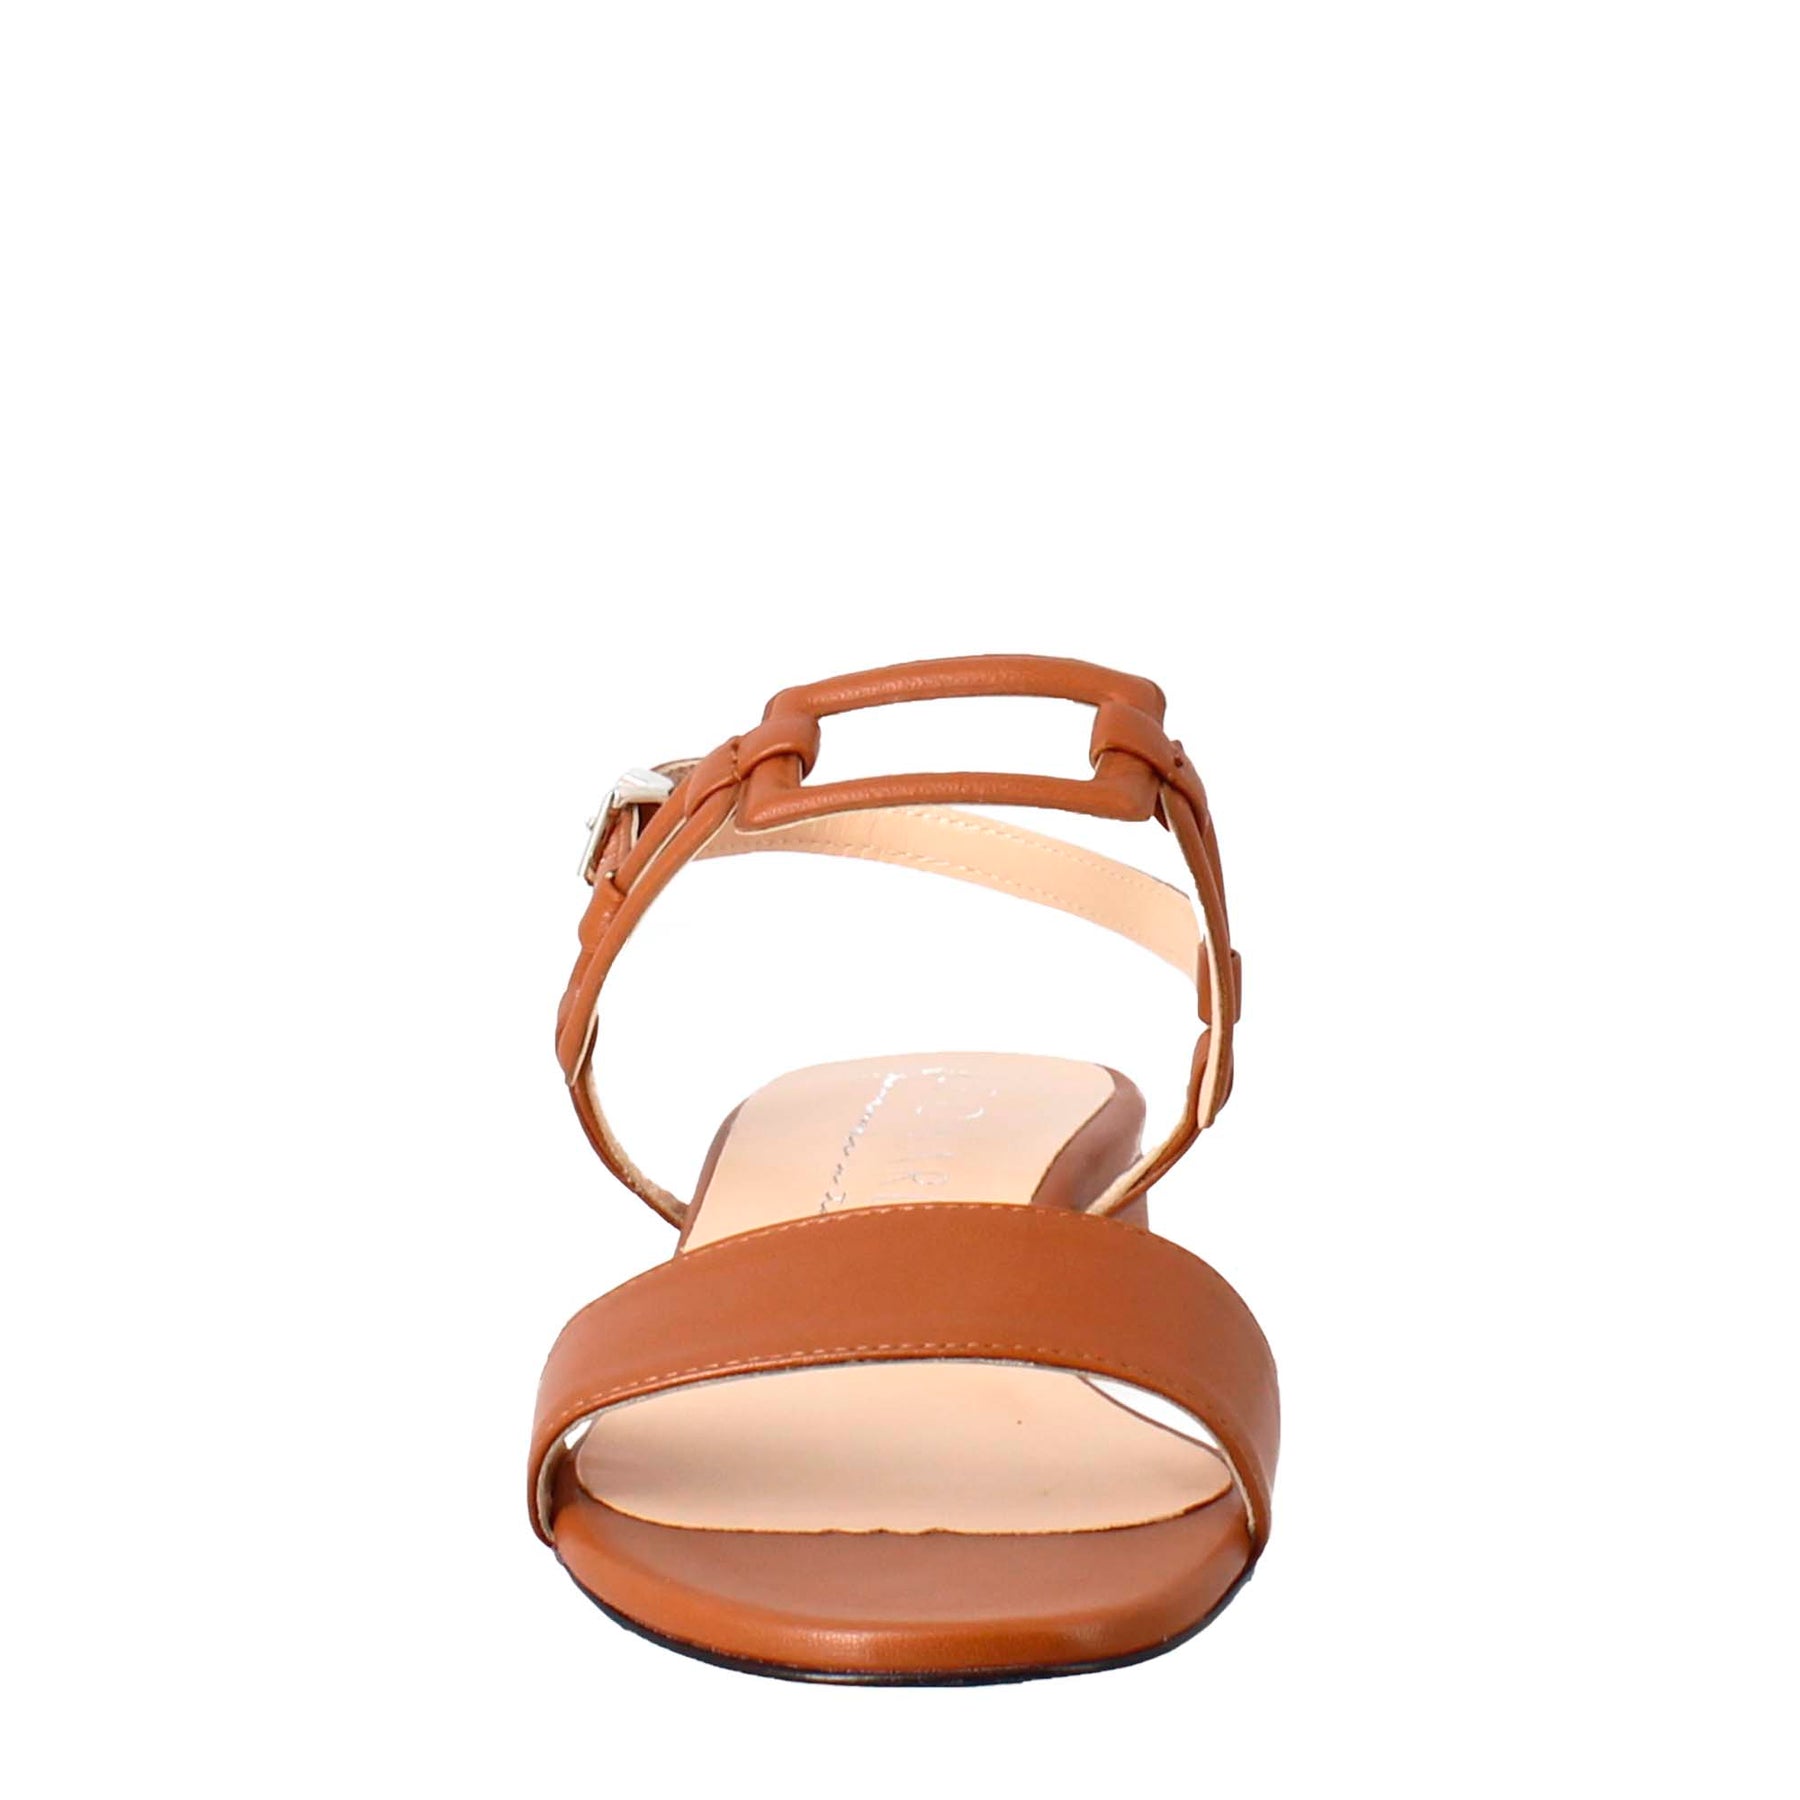 Woman's open sandal with low heel in brown leather 